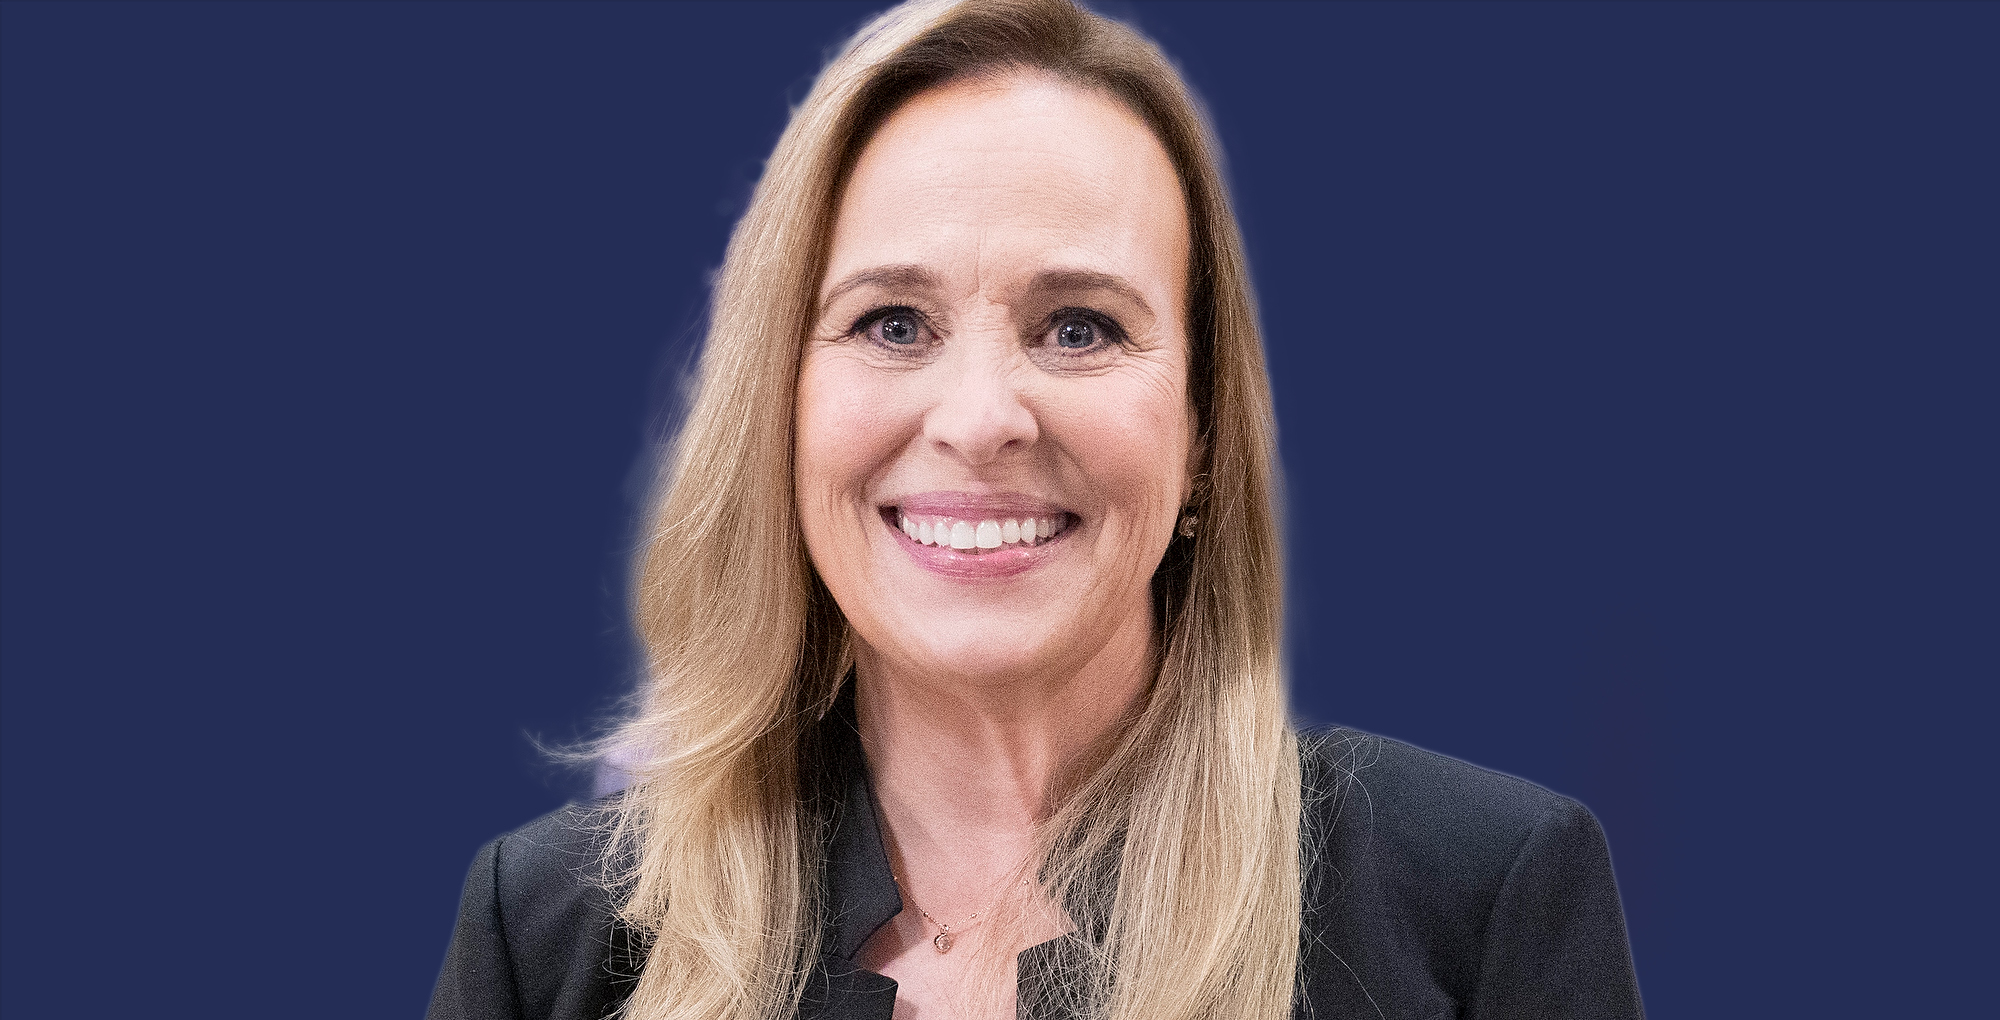 general hospital genie francis smiling on blue background wearing a black top